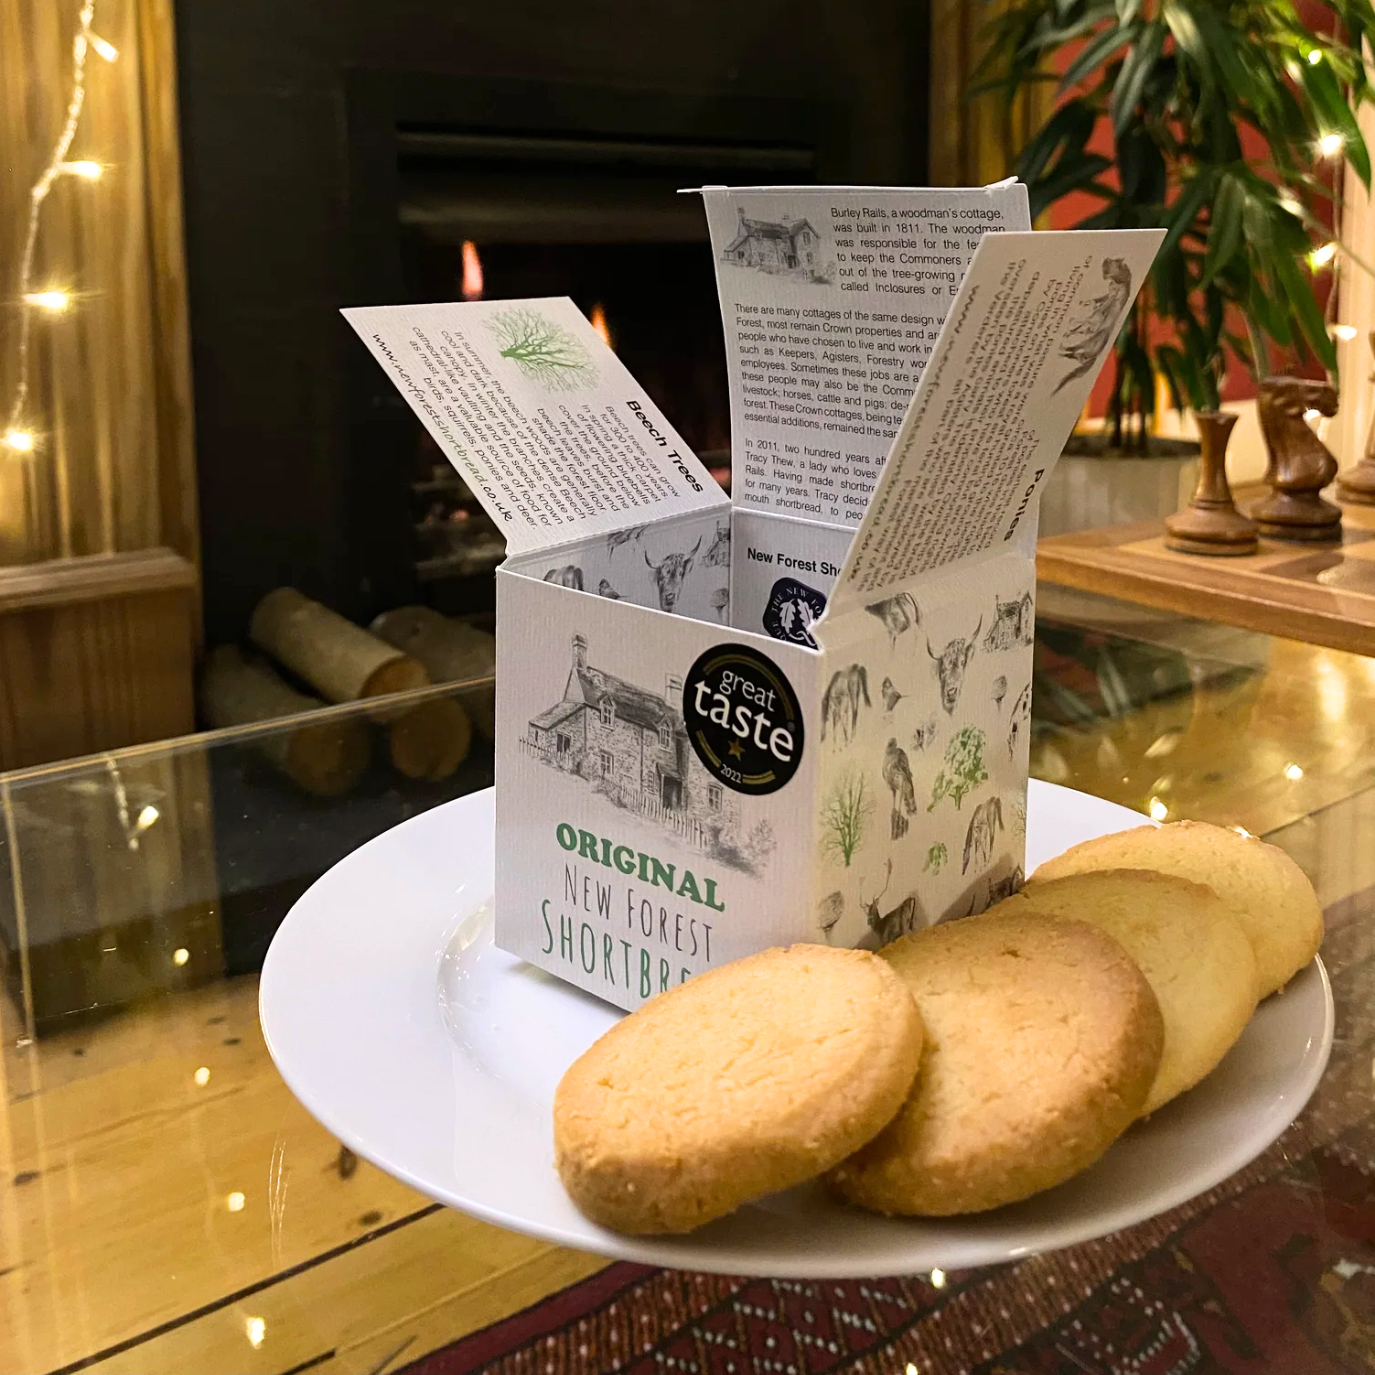 Indulge in the irresistible taste of original flavored shortbread biscuits from New Forest Shortbread! The perfect gift for any foodie craving a delicious treat or a thoughtful gesture to send to loved ones. Elevate your snacking experience with these buttery, crumbly delights, crafted with care and packed with flavor. Ideal for birthdays, holidays, or simply satisfying your sweet tooth.